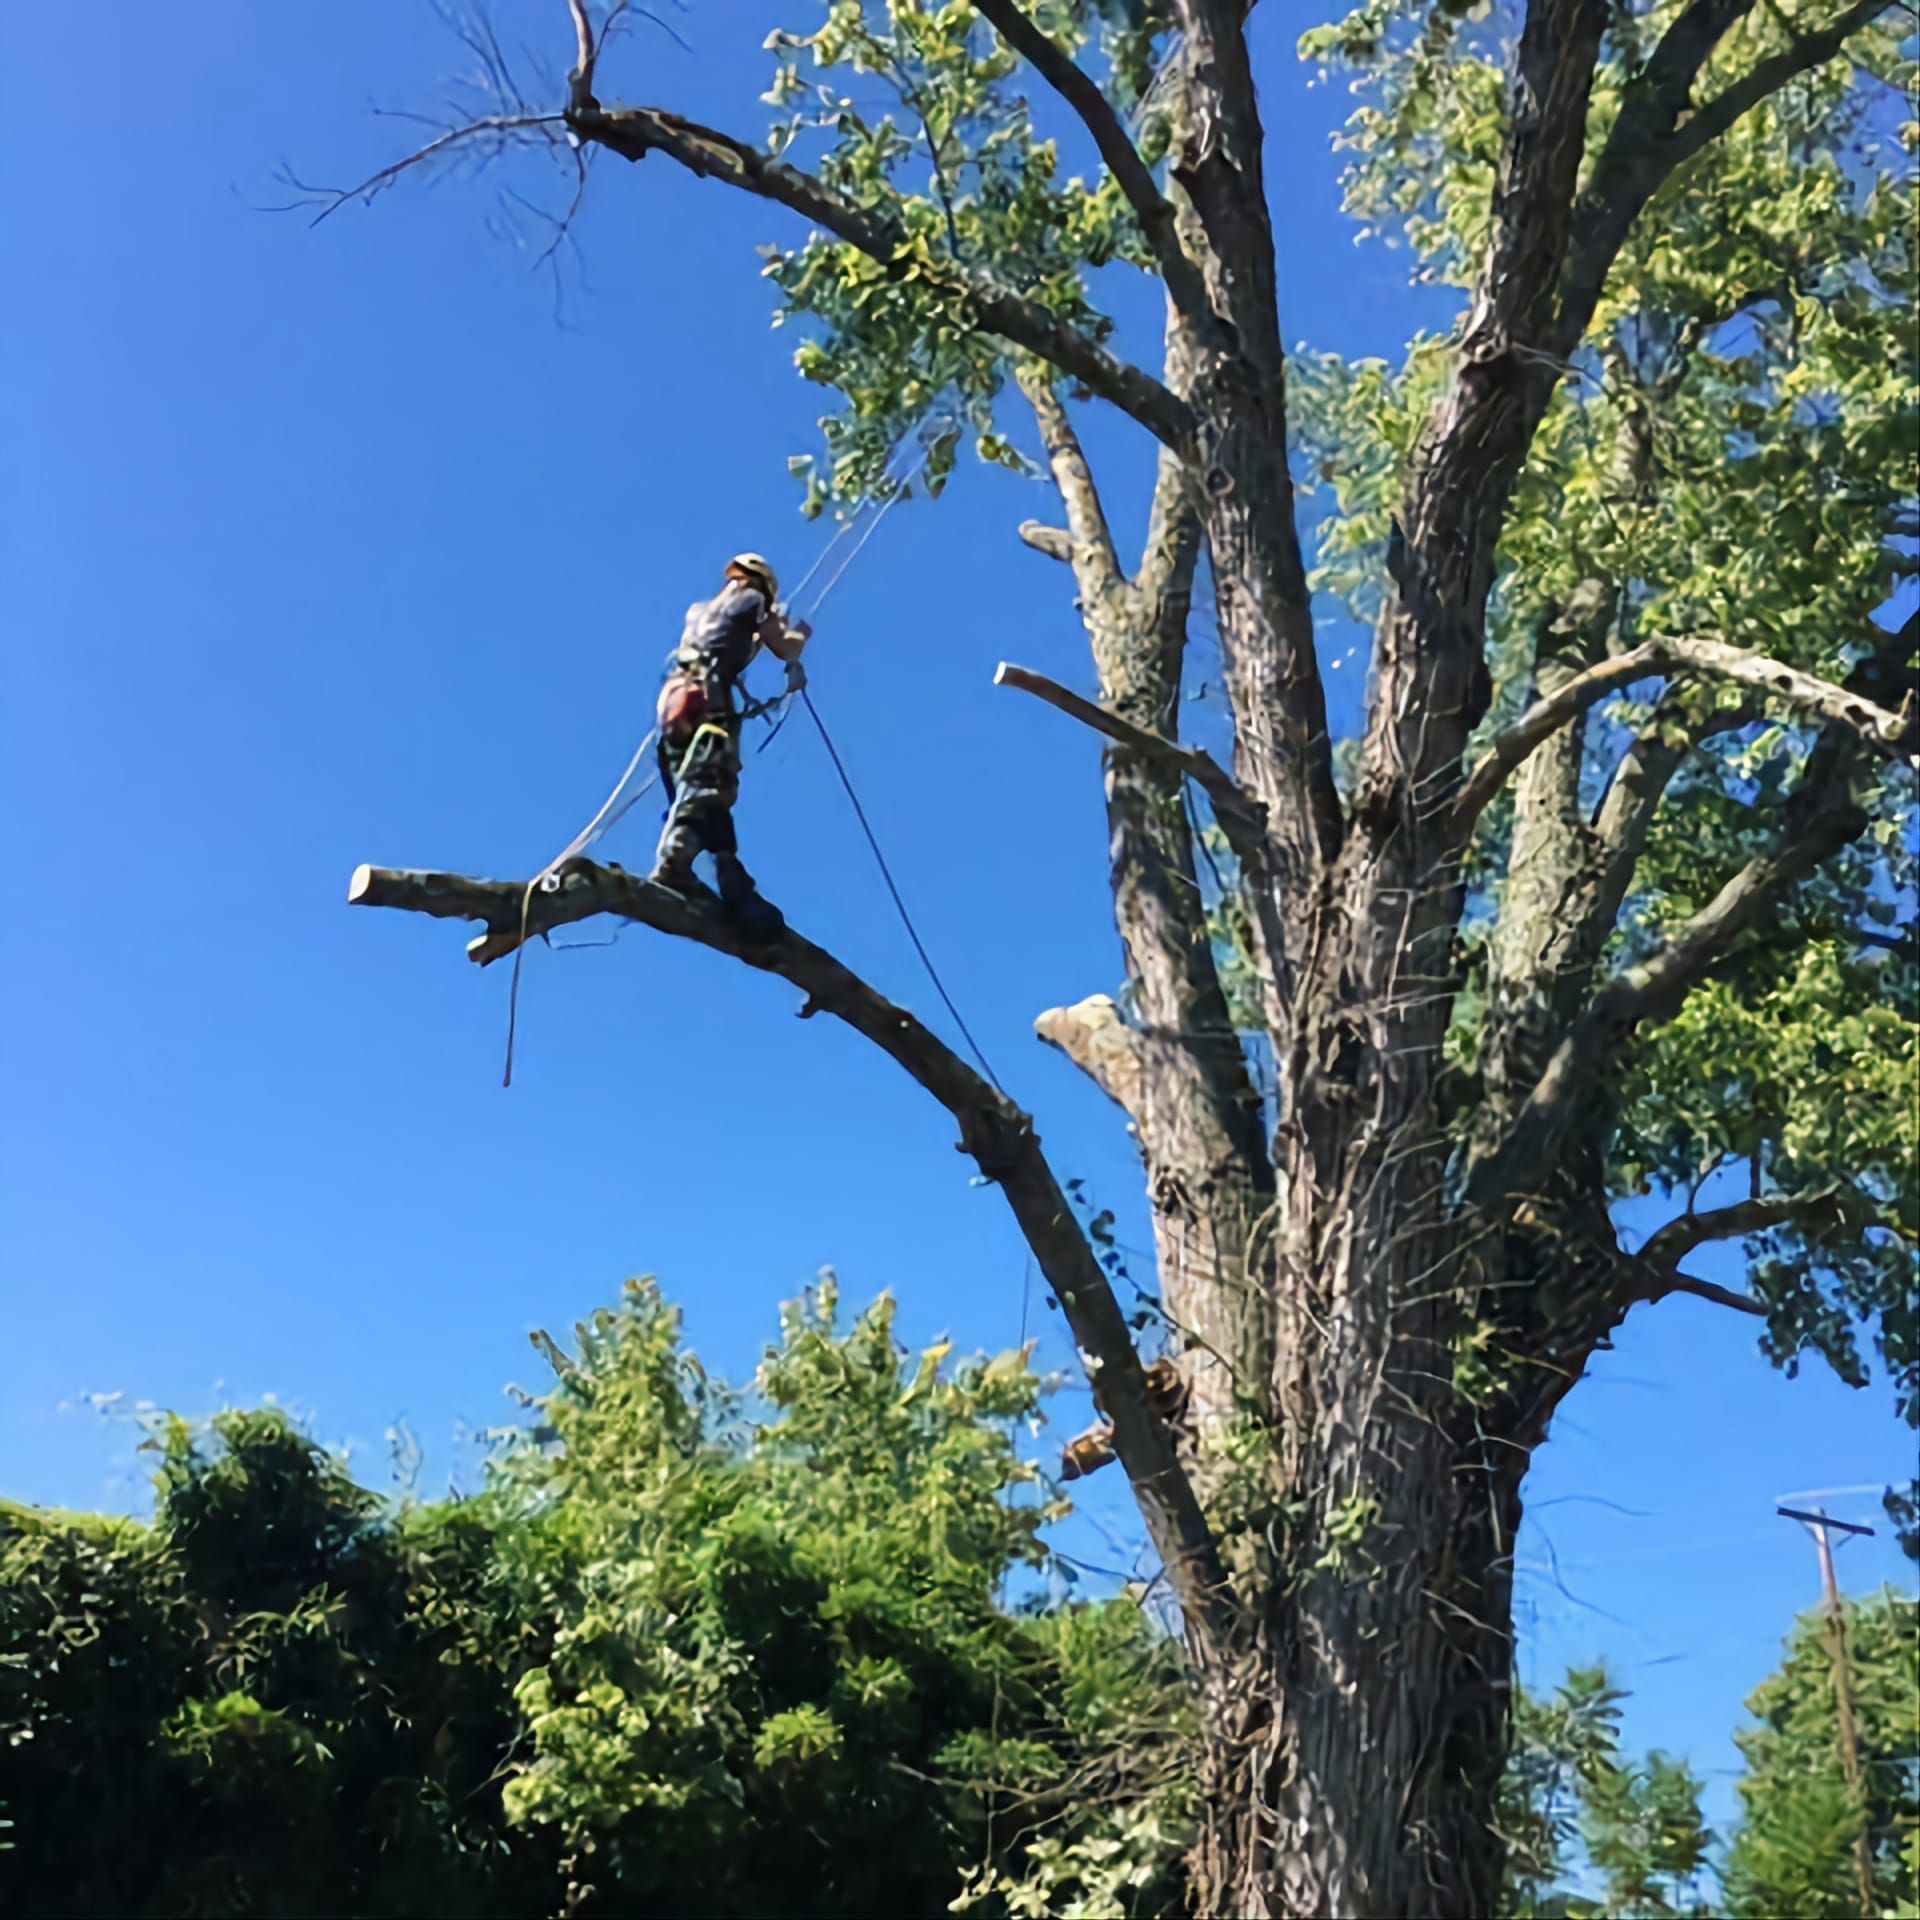 removing a tree branch